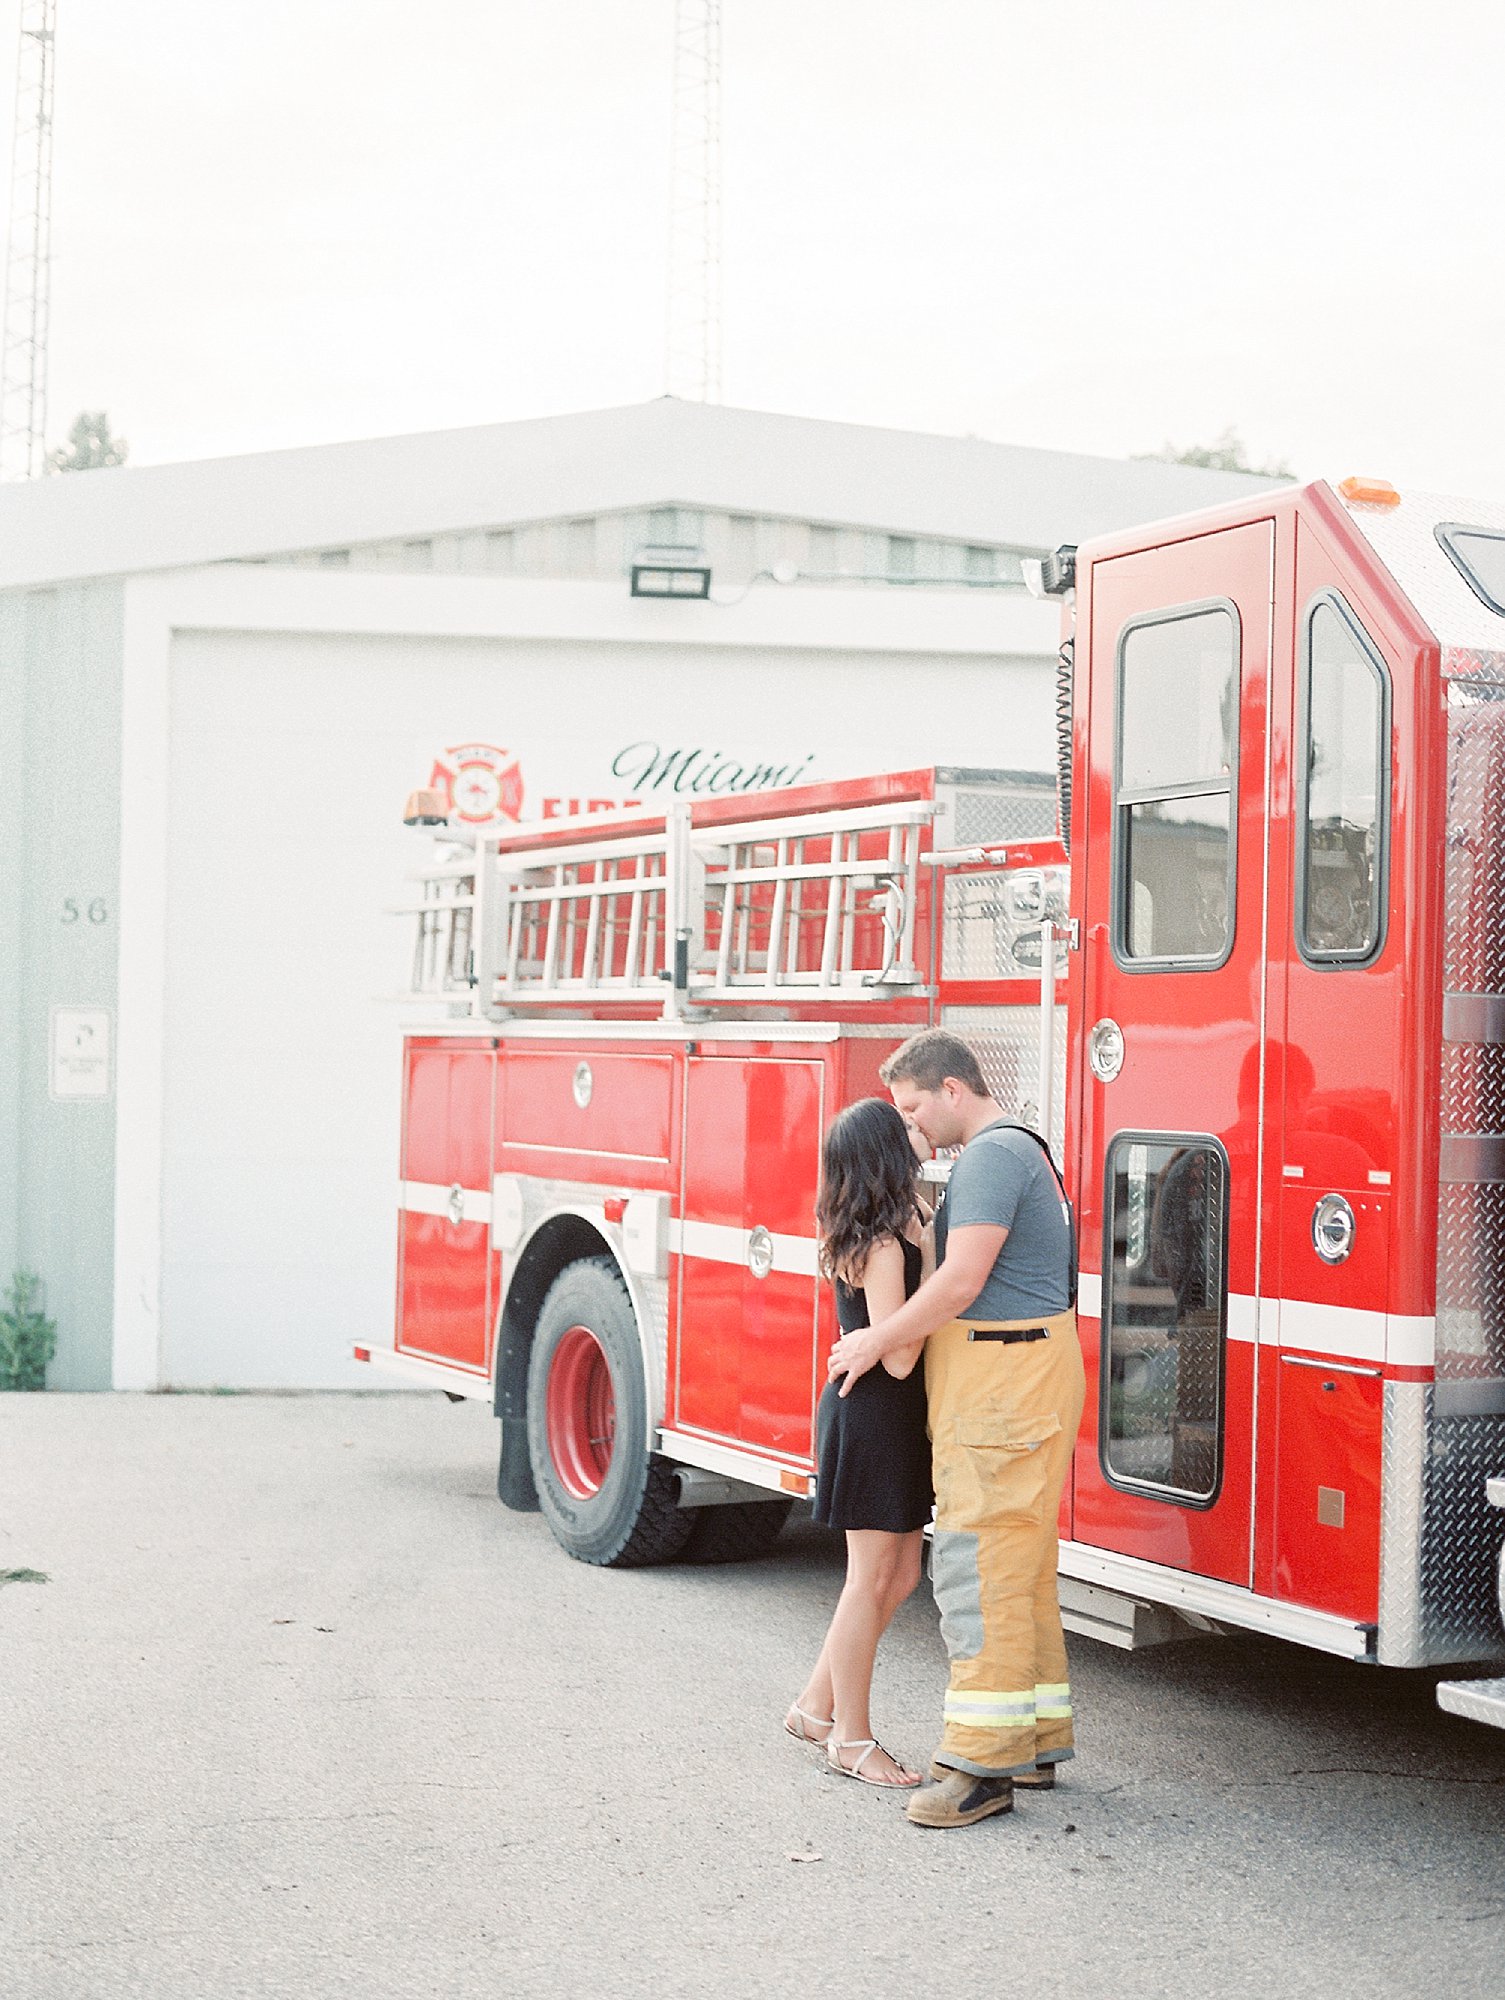 Firefighter Engagement Session, Firefighter Photoshoot Ideas, Engagement Session ideas, Firefighter couples photos, Manitoba Engagement Session, Winnipeg Wedding, Fun Engagement Session idea